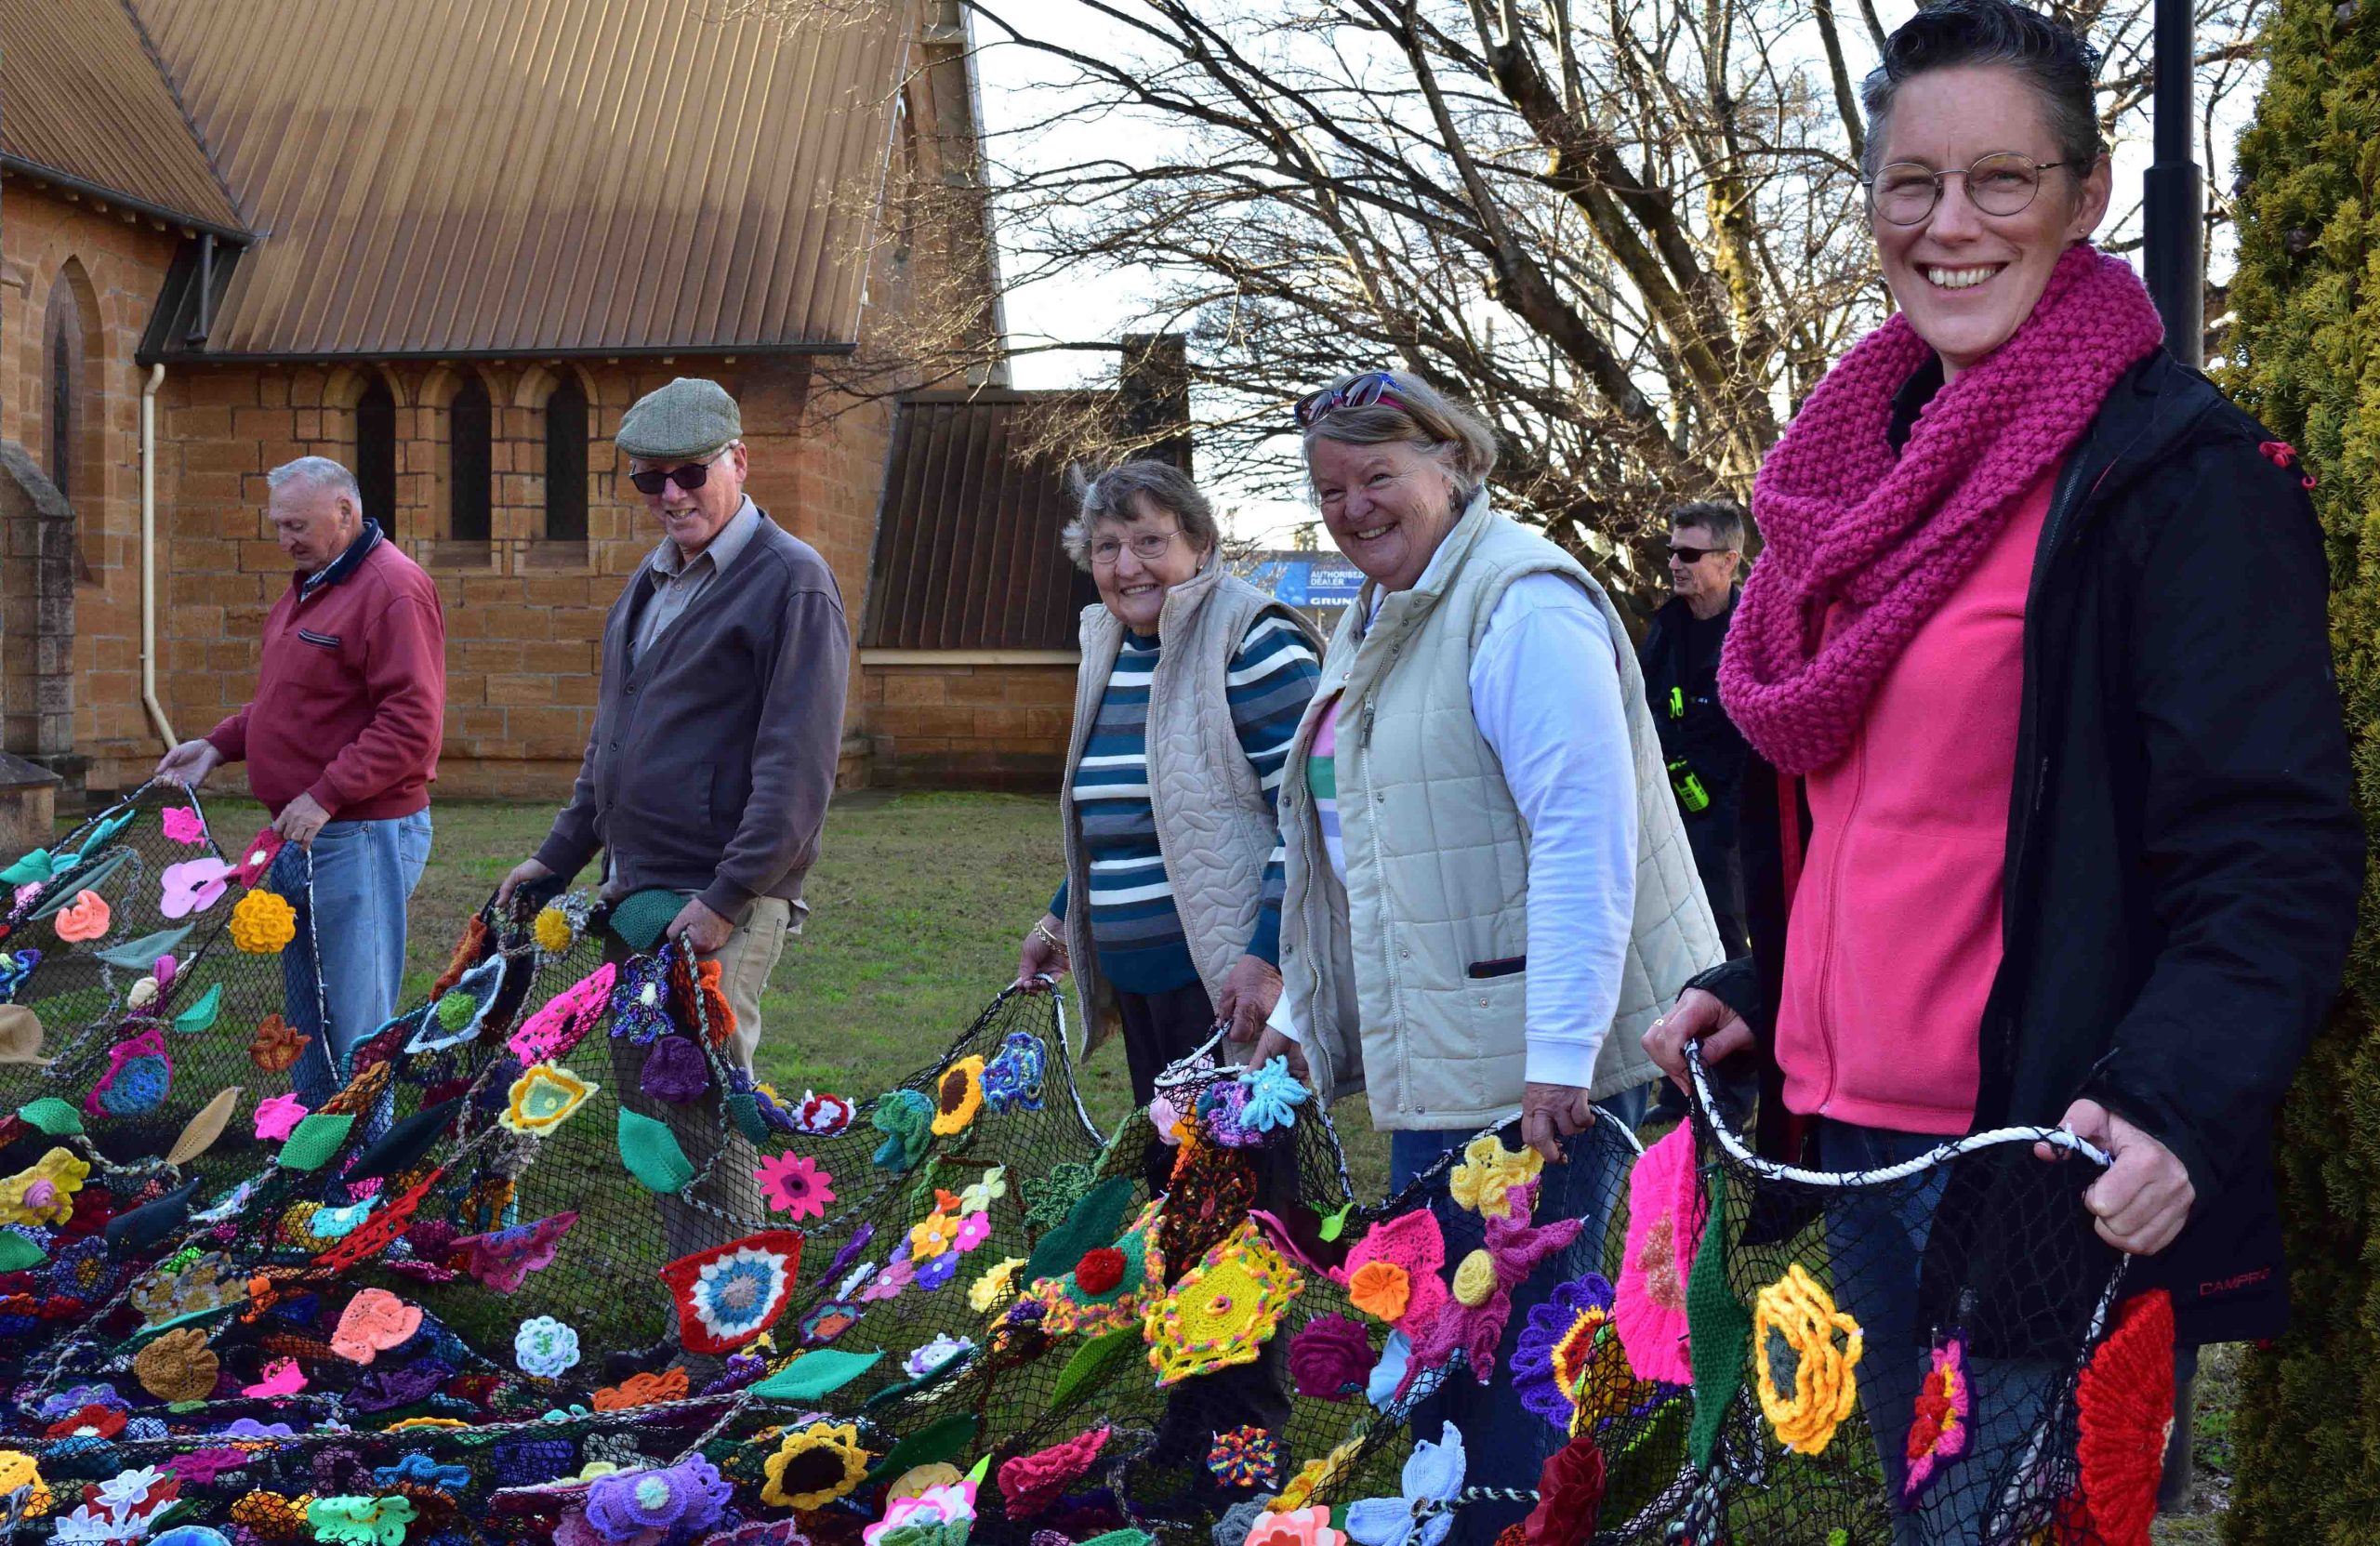 St Mark’s, Warwick community members waiting for the flower tower to be hoisted